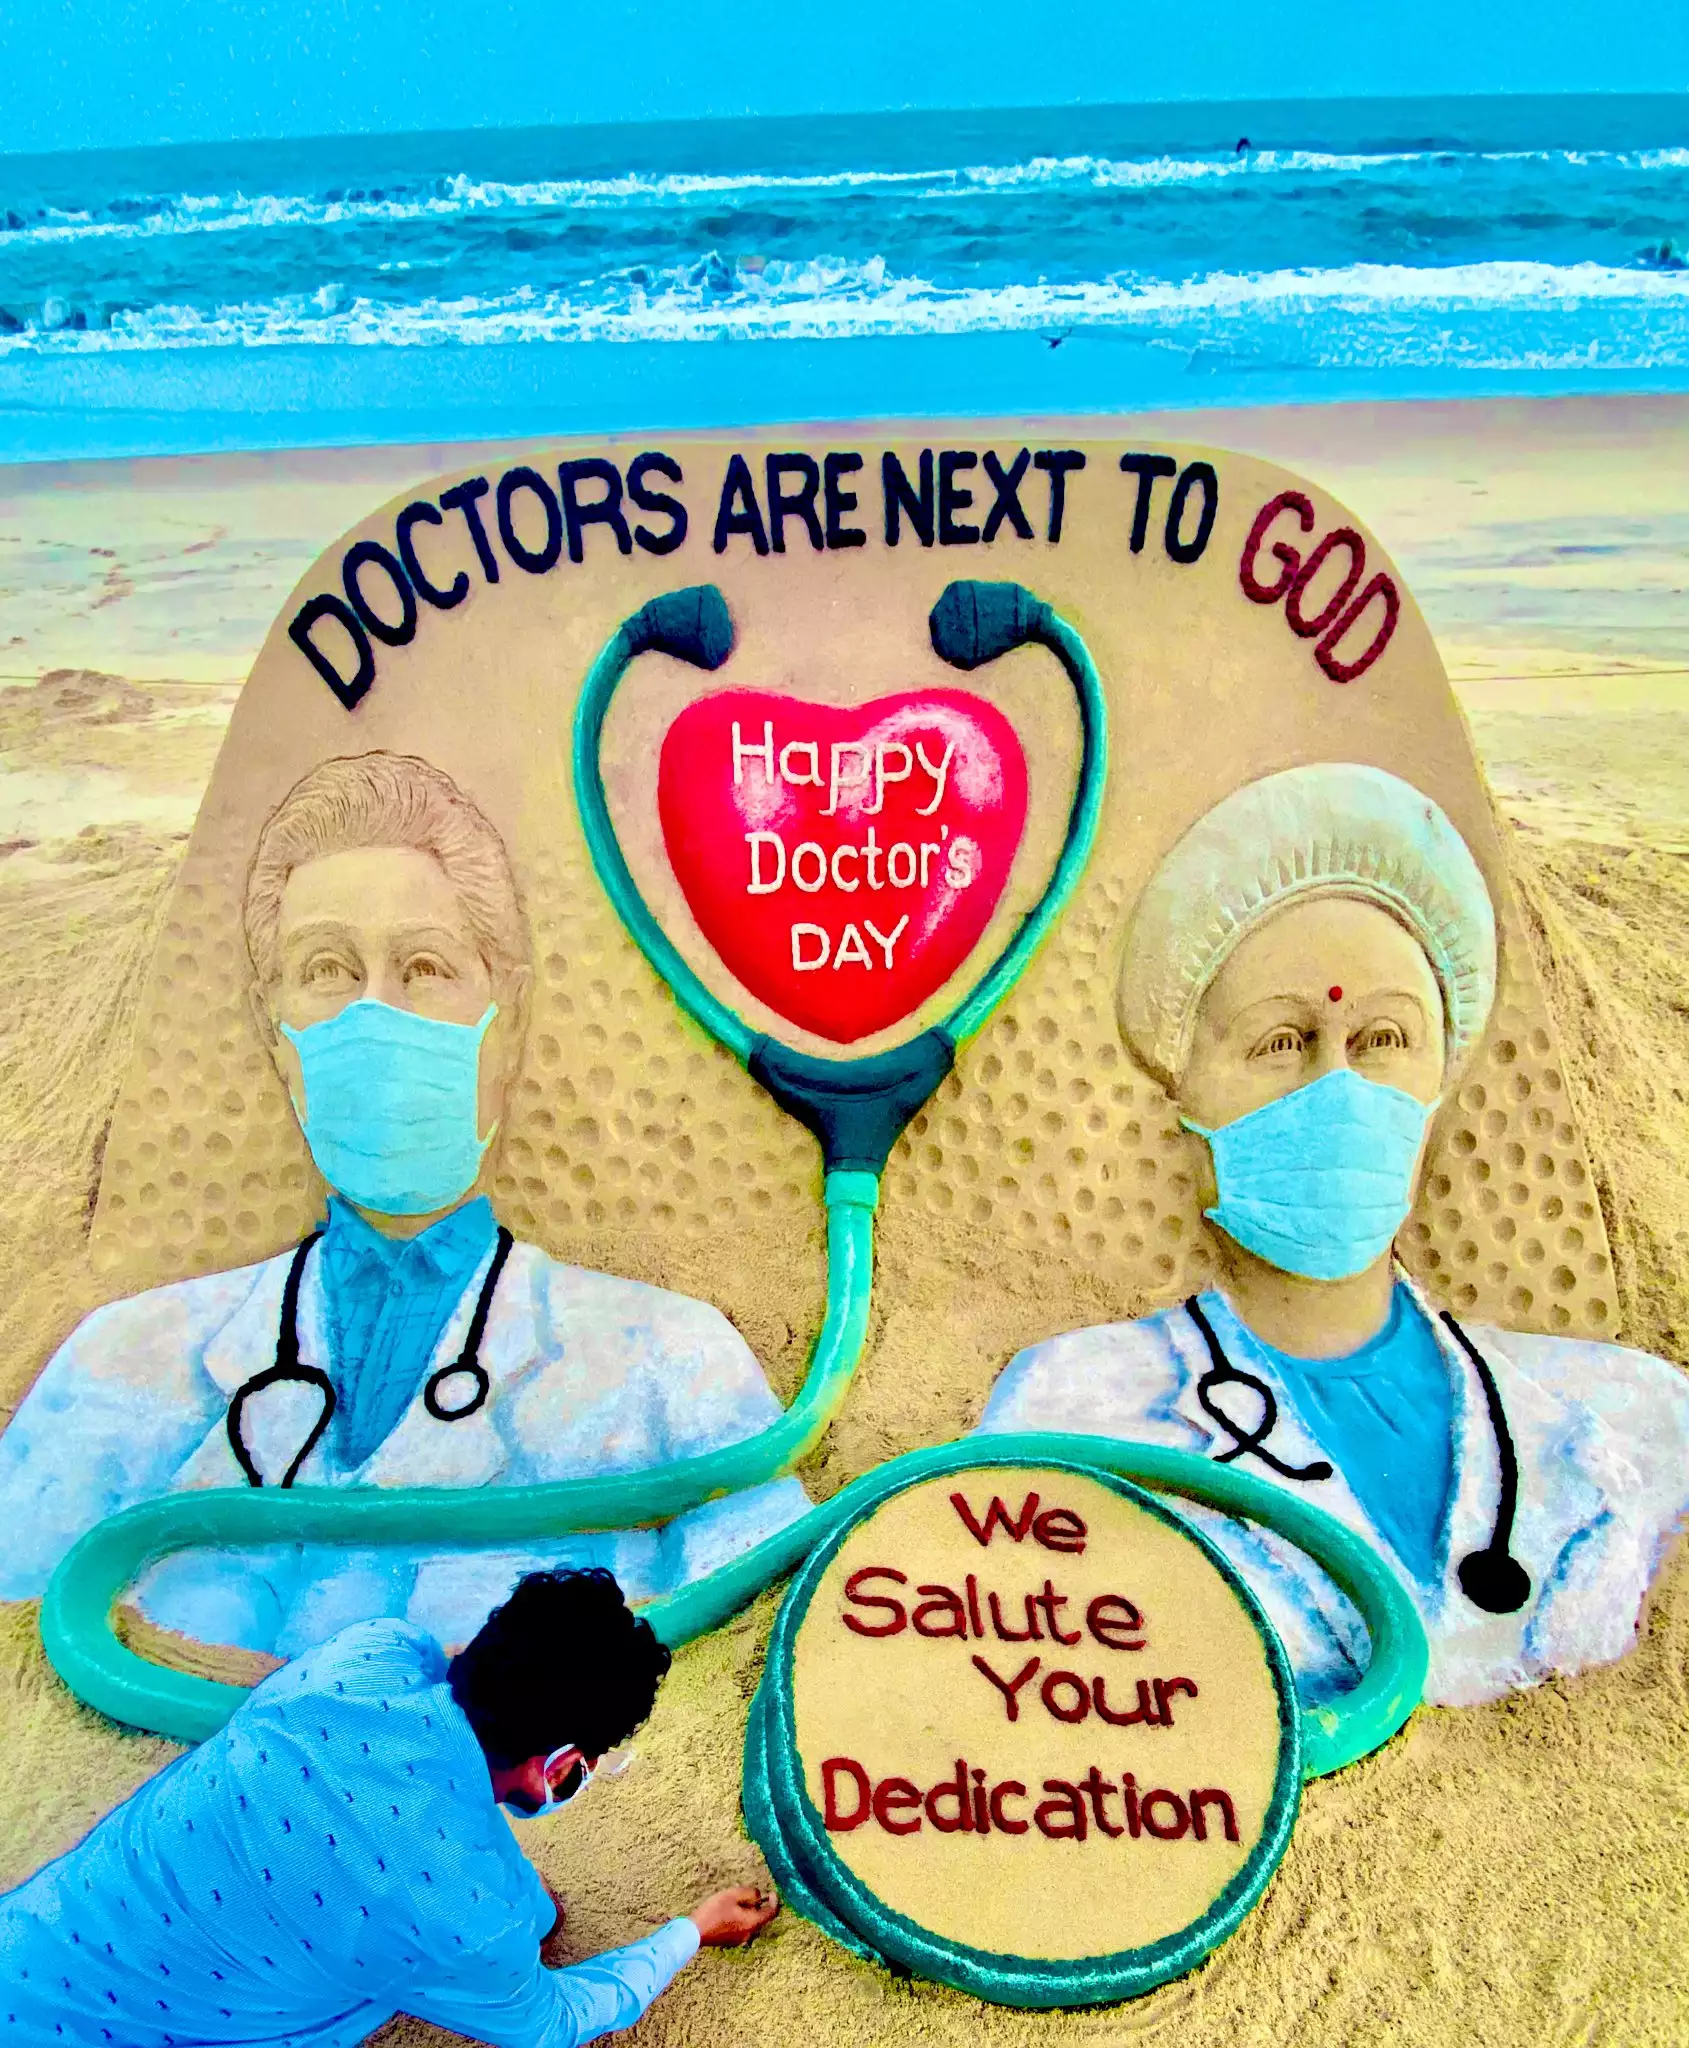 In pics: India celebrates National Doctors' Day